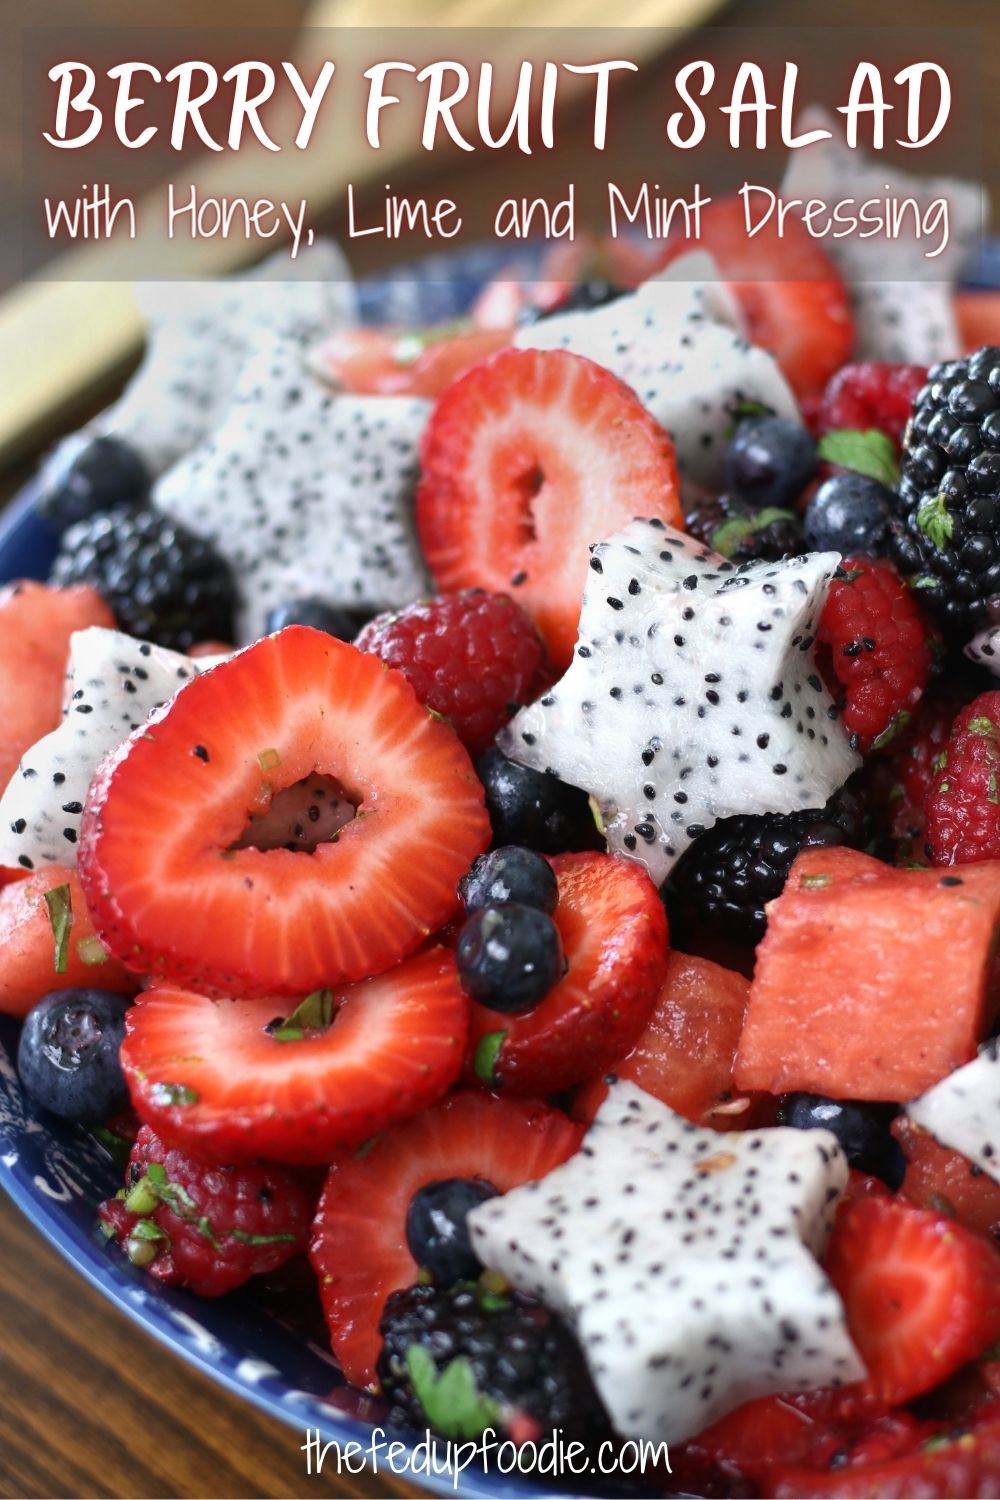 Berry Fruit Salad with a honey, lime and mint dressing is a beautiful and tasty addittion to summer parties. With strawberries, watermelon, blueberries, raspberries, blackberries and dragonfruit, this recipe is perfect as a side dish or fun summer dessert. 
#BerryFruitSalad #BerryFruitSaladWithMint #BerryFruitSaladWithHoney #BerryFruitSaladWithHoneyLimeDressing #FunSummerDessert #SummerBerryFruitSaladWithHoneyLimeGlaze #SummerFruitSalad #FruitSaladIdeas #BestSummerFruitSalad #DragonfruitSalad #DragonfruitSaladRecipe